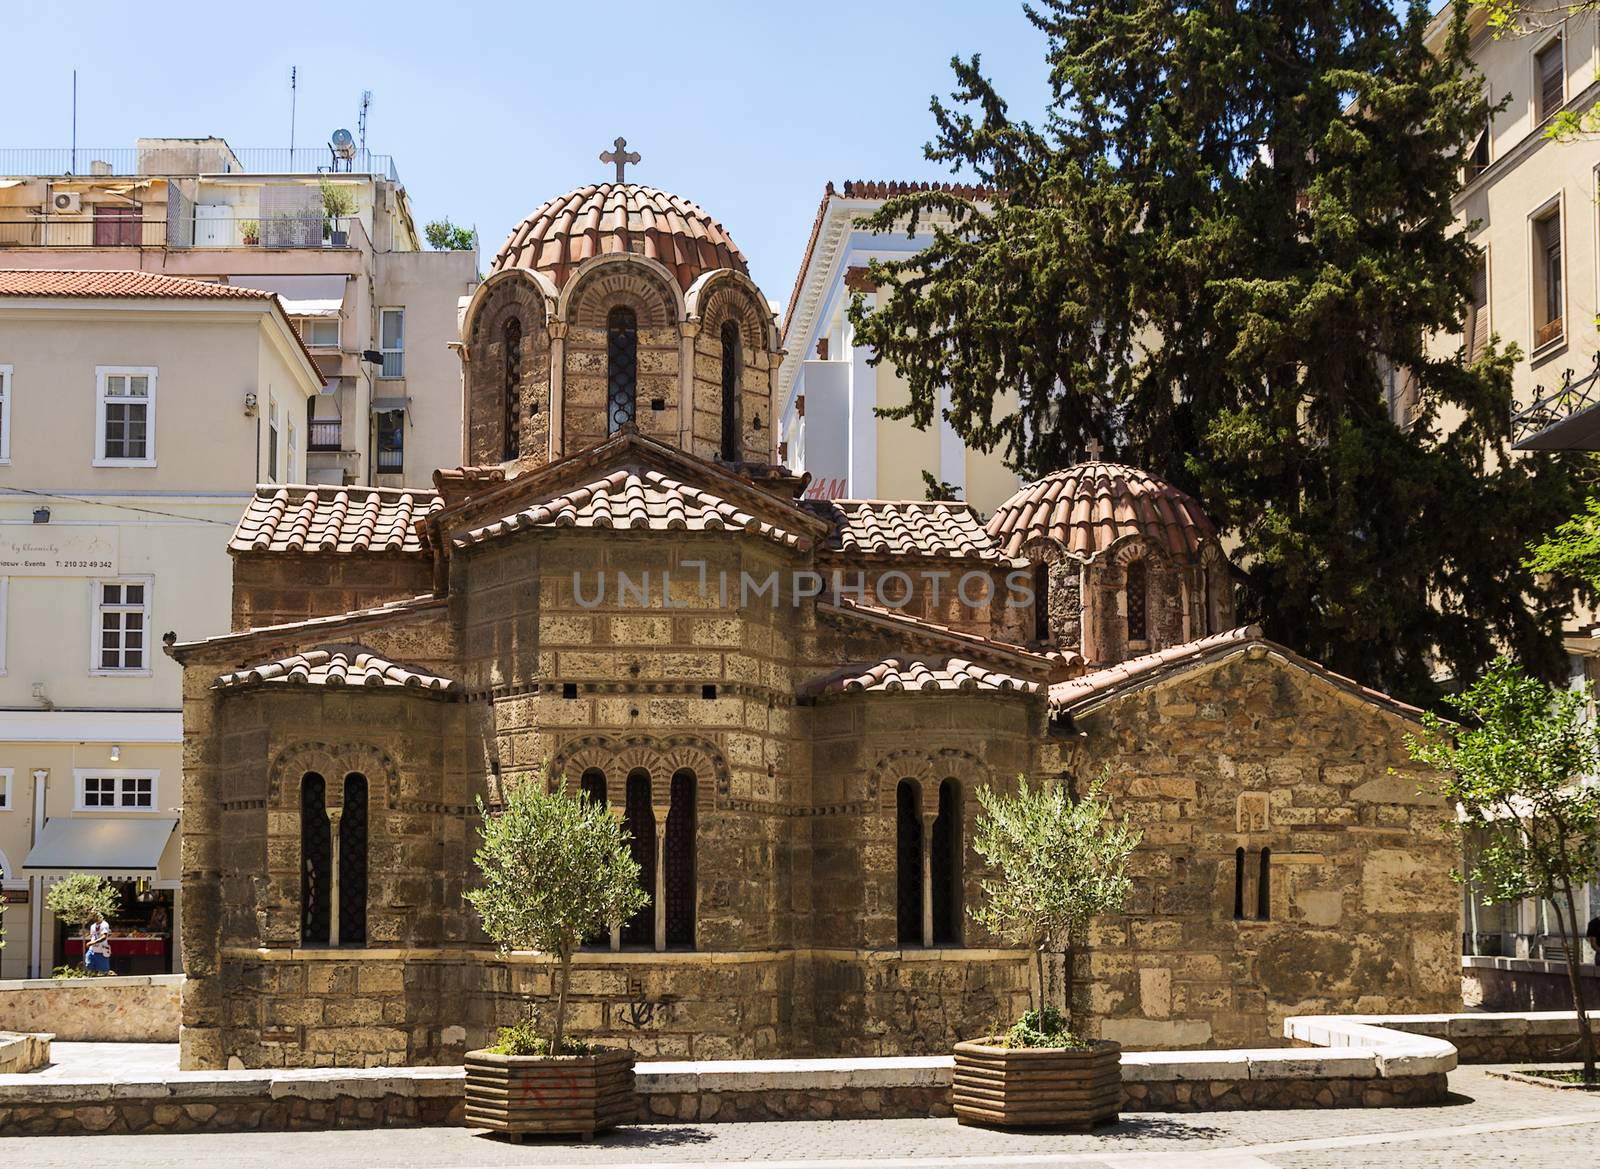 The Church of Panaghia Kapnikarea is a Greek Orthodox church and one of the oldest churches in Athens.